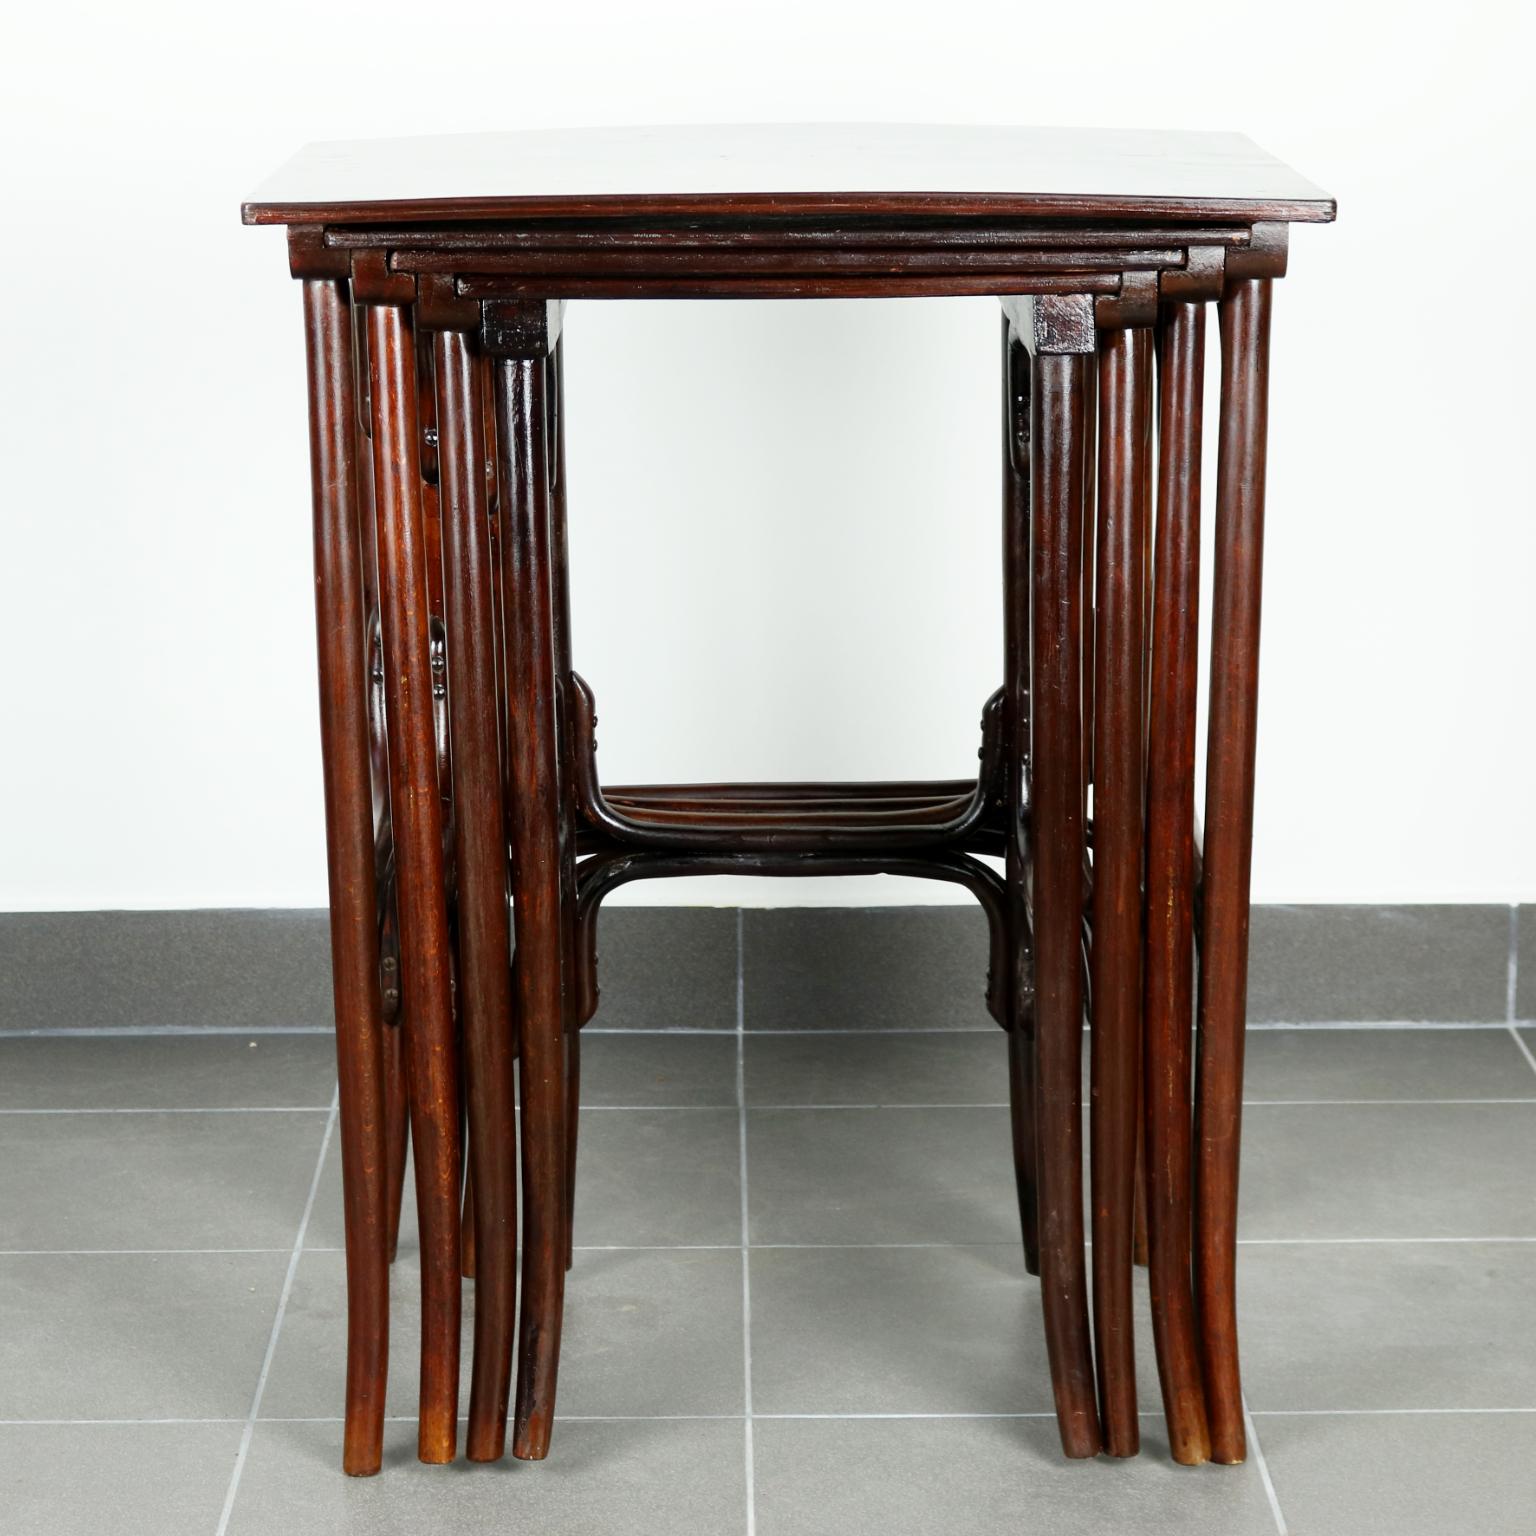 Early 20th Century Set of Four Art Nouveau Nesting Tables No. 10 by Thonet, circa 1900 For Sale